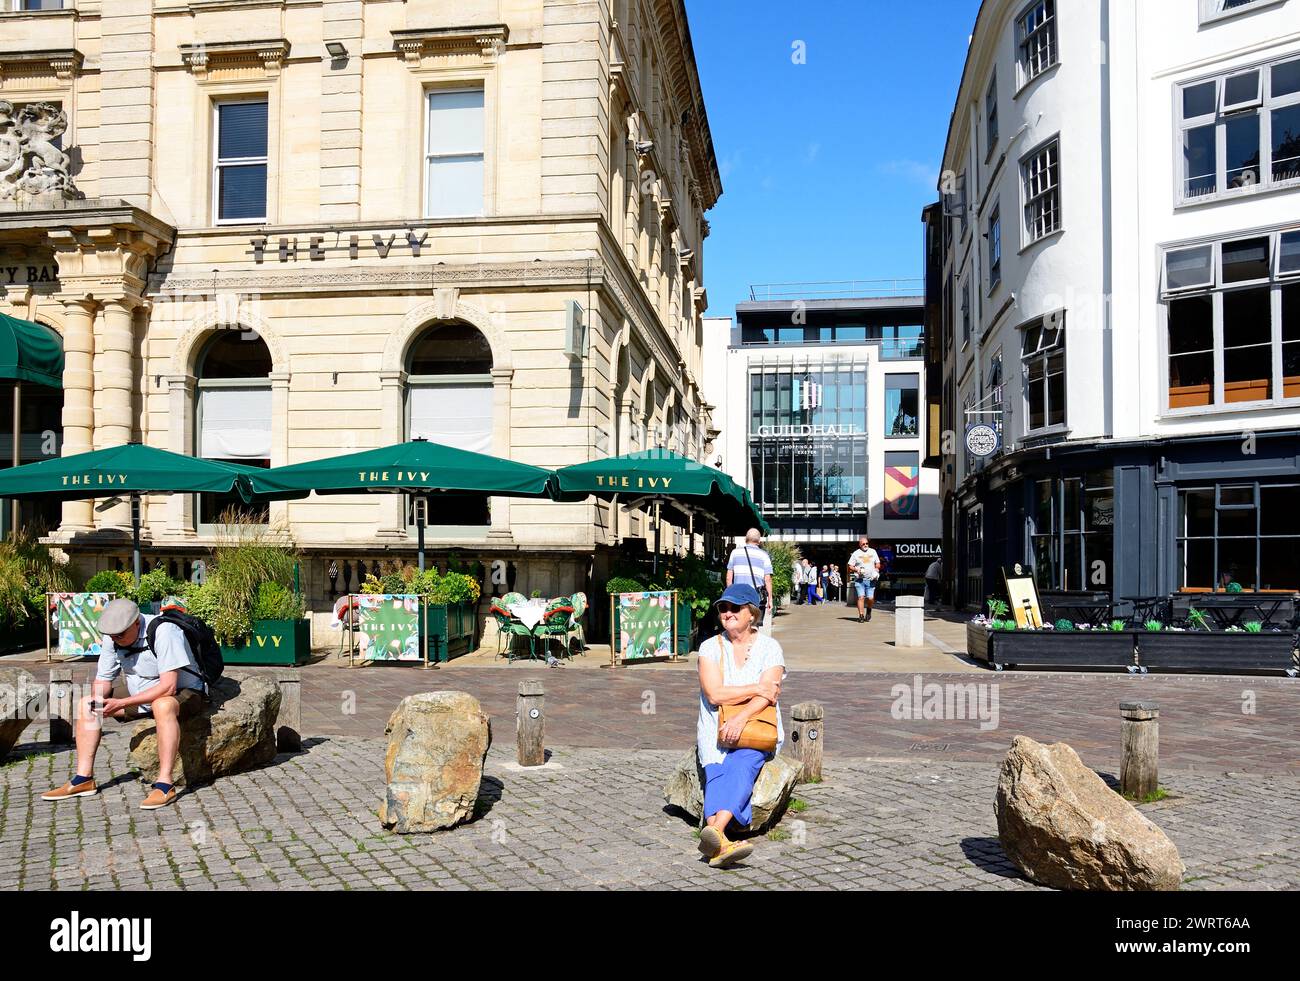 The Ivy Bistro and side street along Cathedral Yard with tourists sitting on rocks in the foreground, Exeter, Devon, UK, Europe. Stock Photo